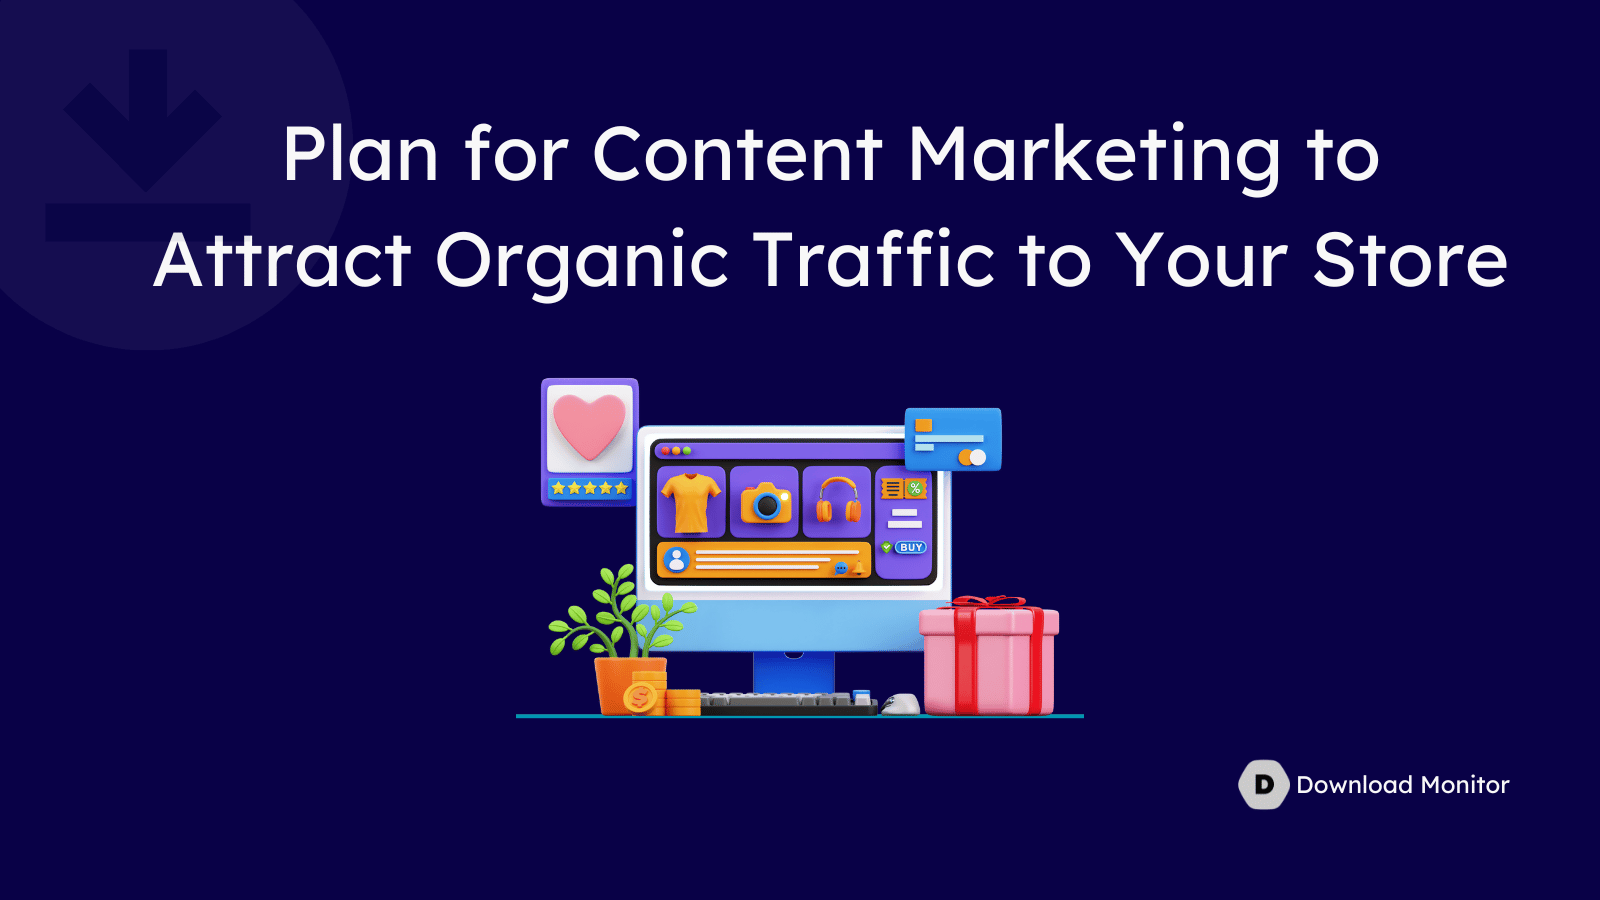 Plan for Content Marketing to Attract Organic Traffic to Your Store